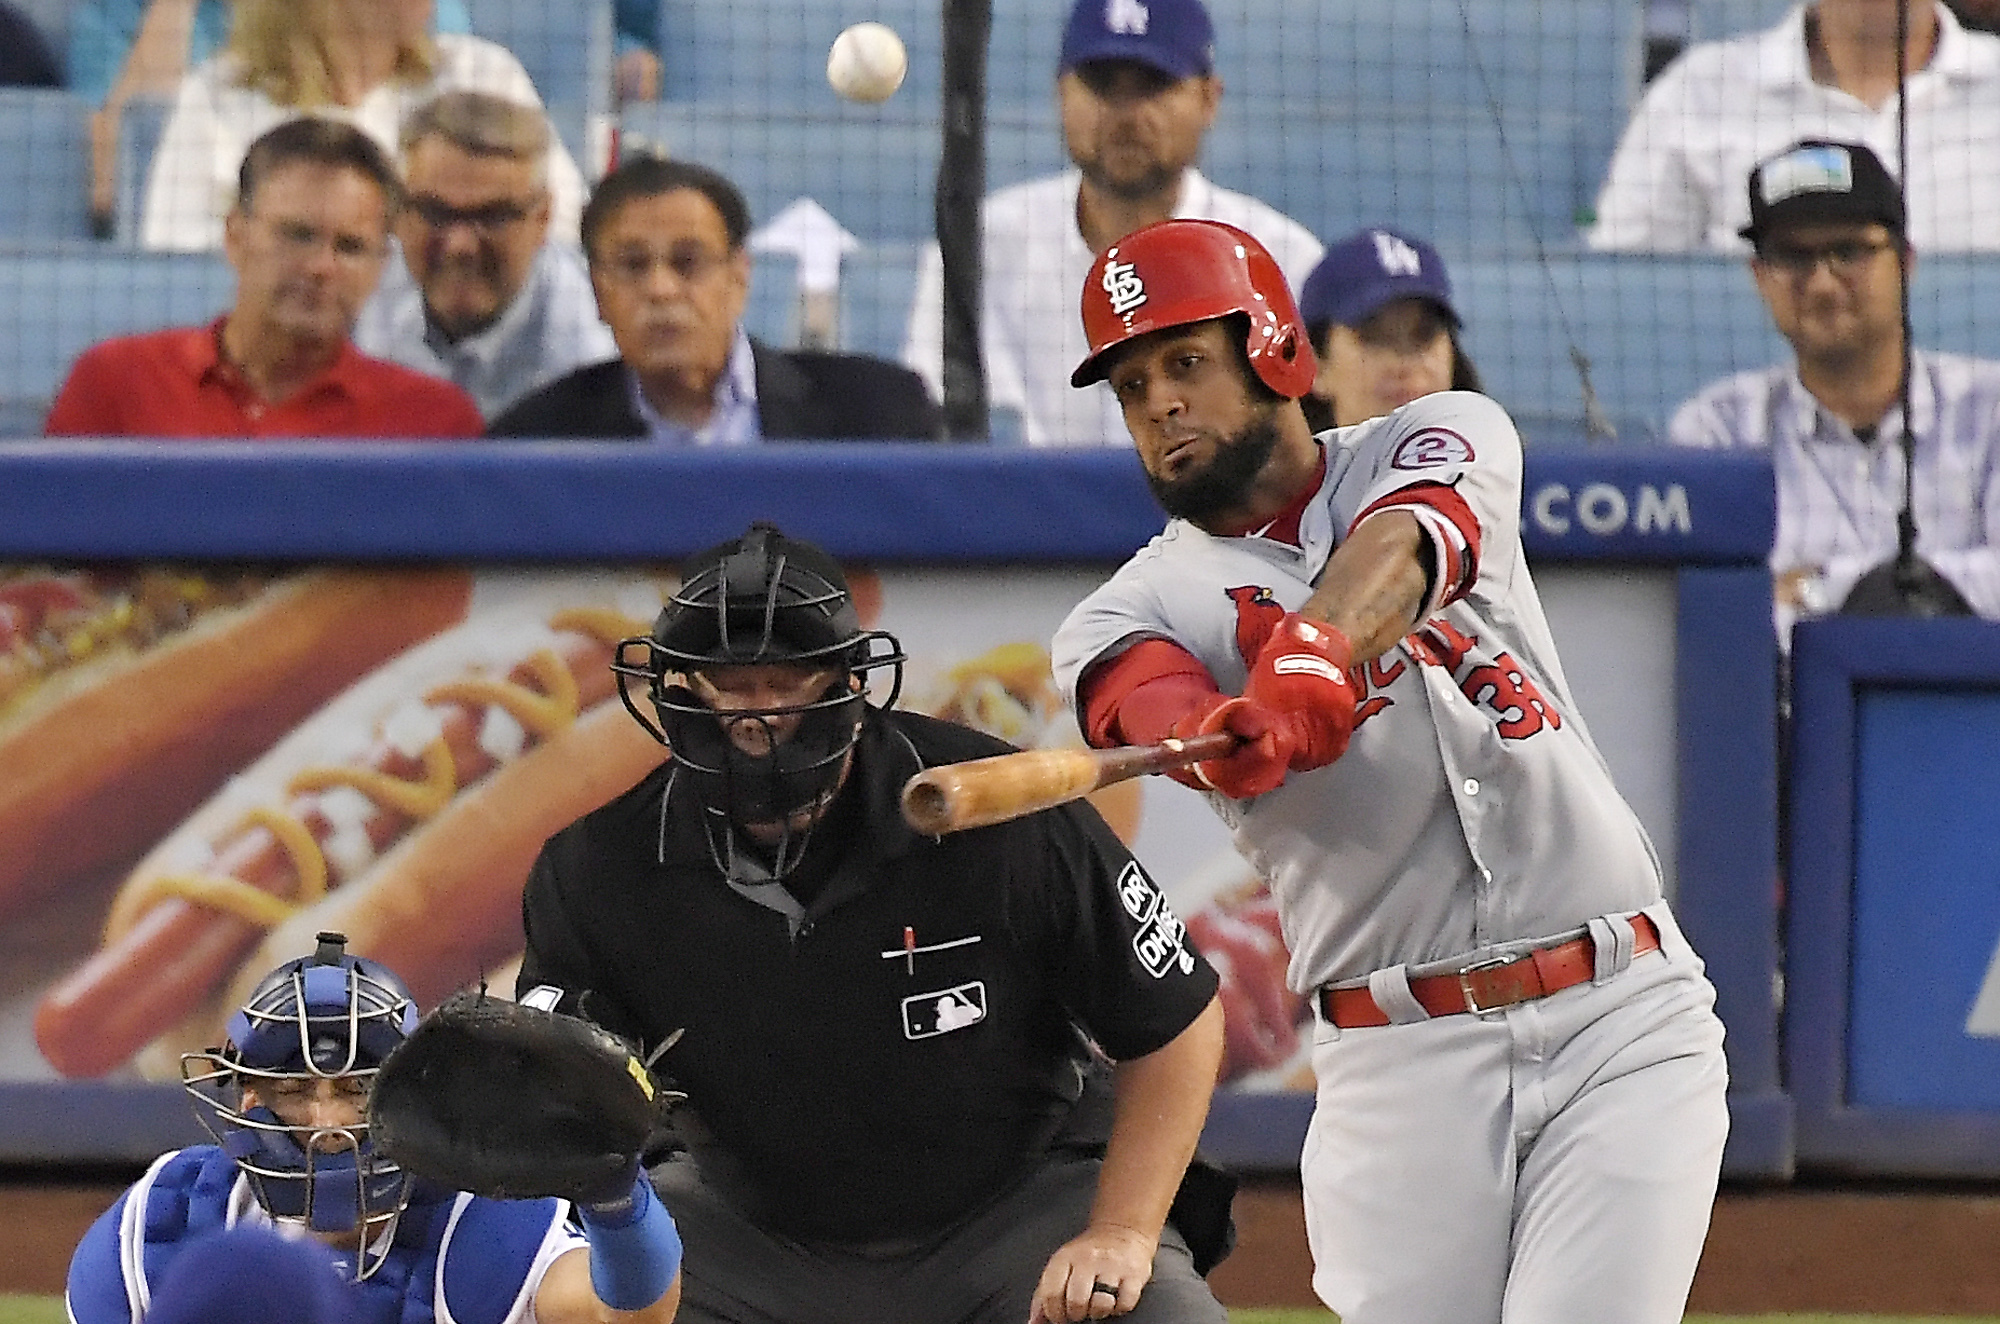 Jansen gives up 2 HRs in return, Cards top Dodgers 5-3